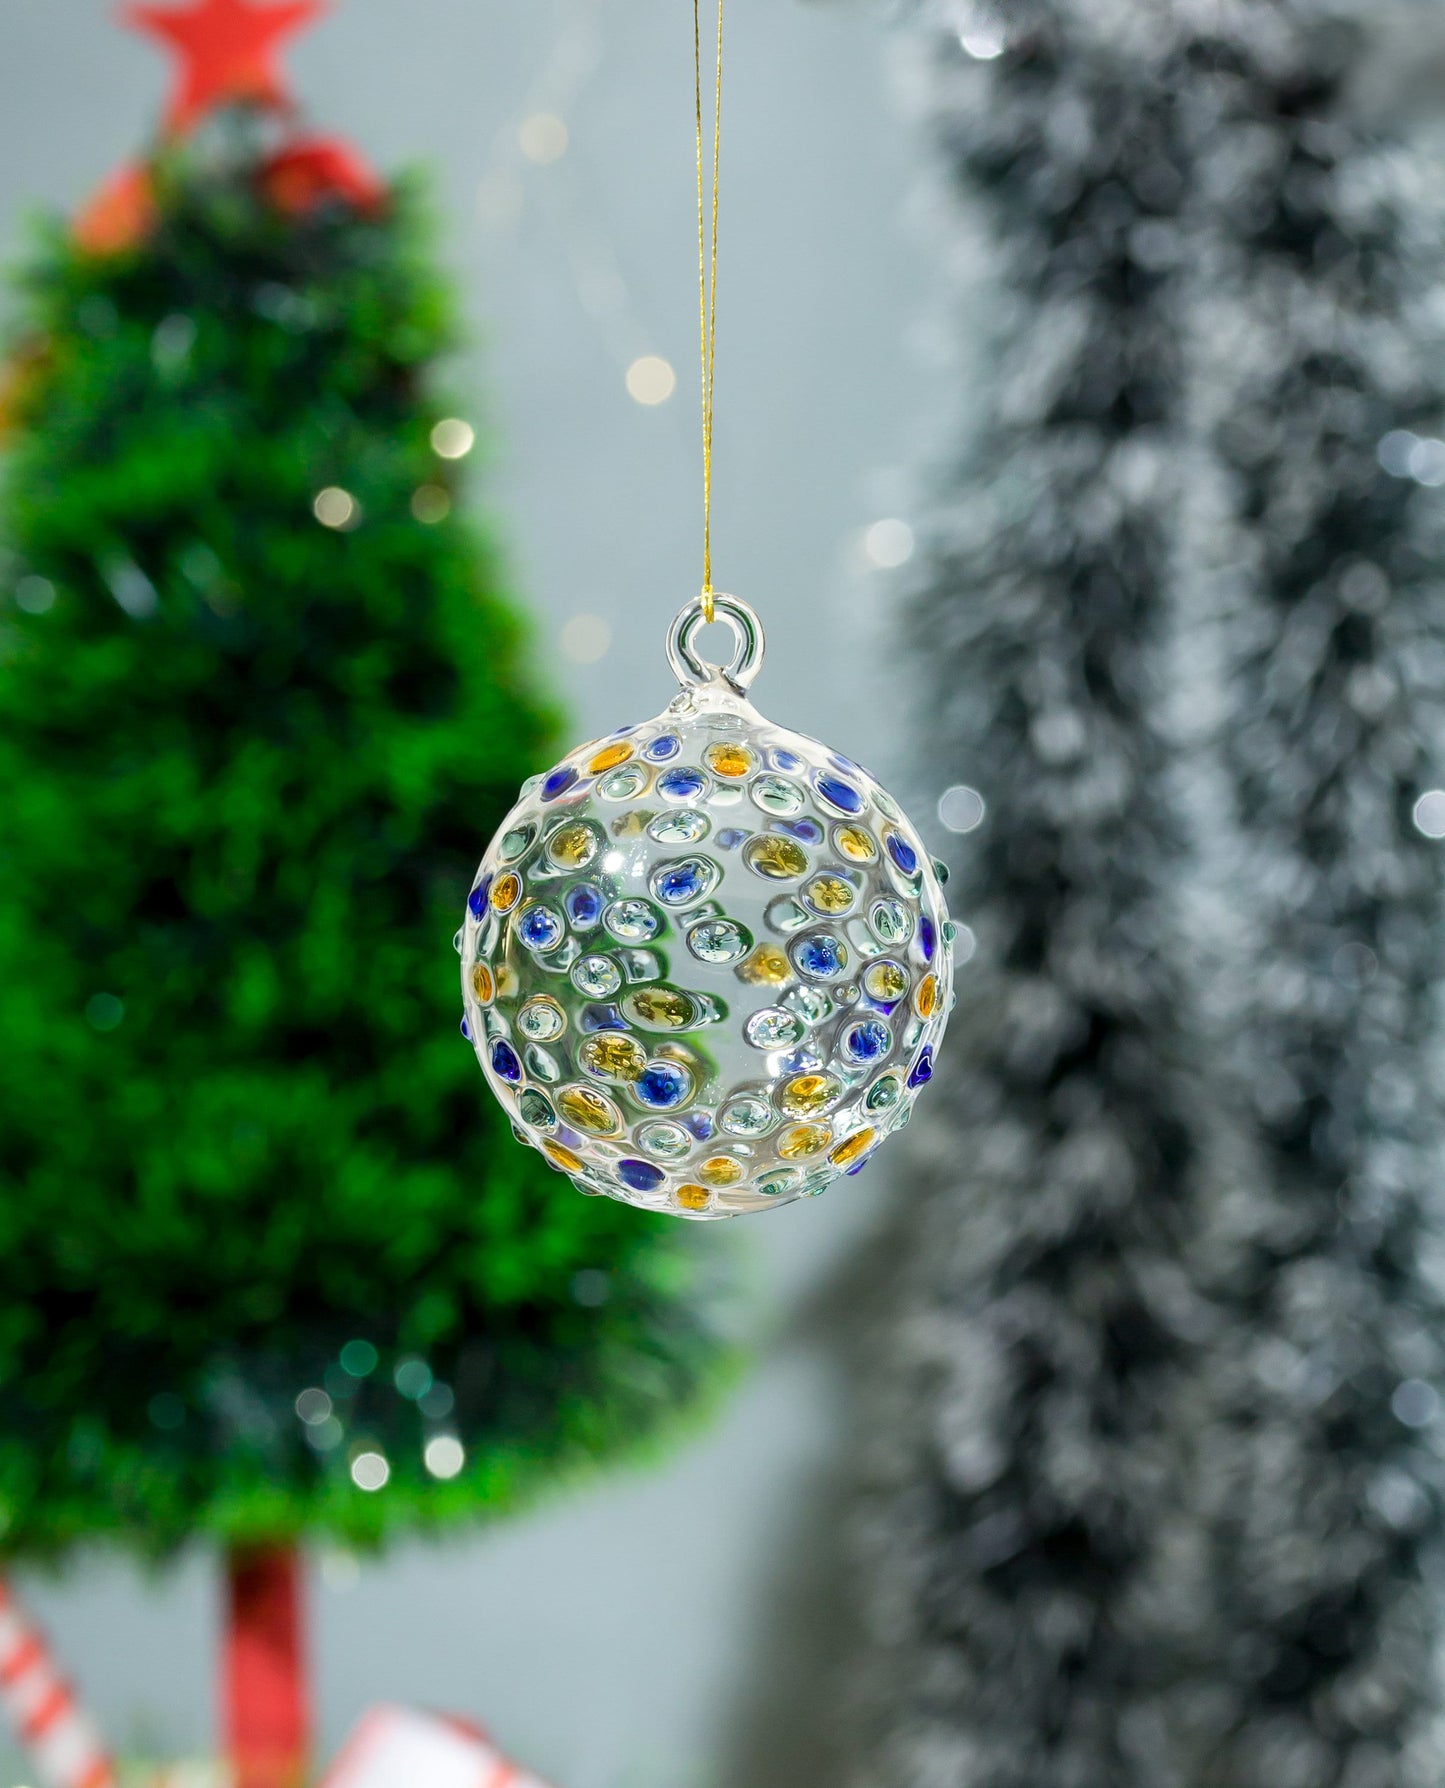 Multicolored Tree topper Glass ornament for christmas decorations | hanging ball ornaments for xmas holidays | handblown Christmas ornaments